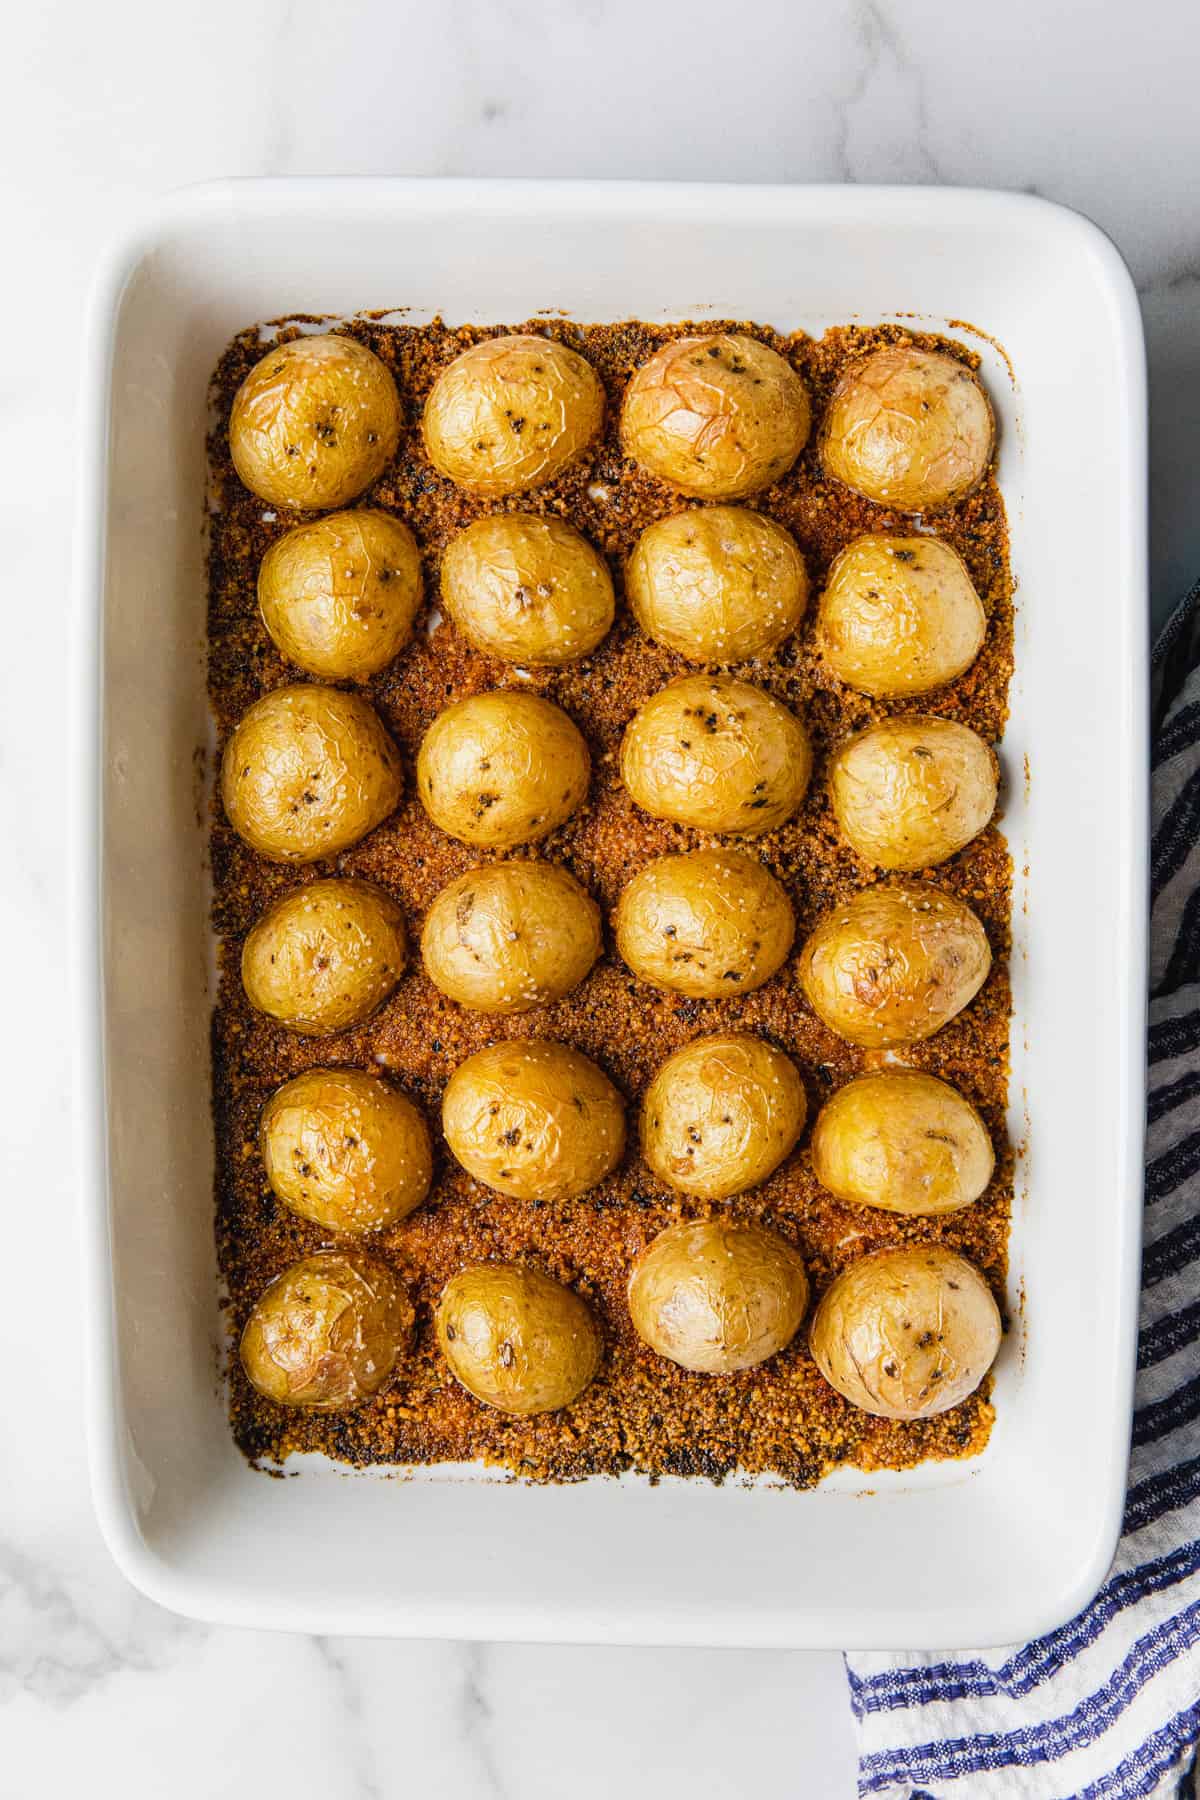 Potatoes cut side down in a baking dish before and after baking.